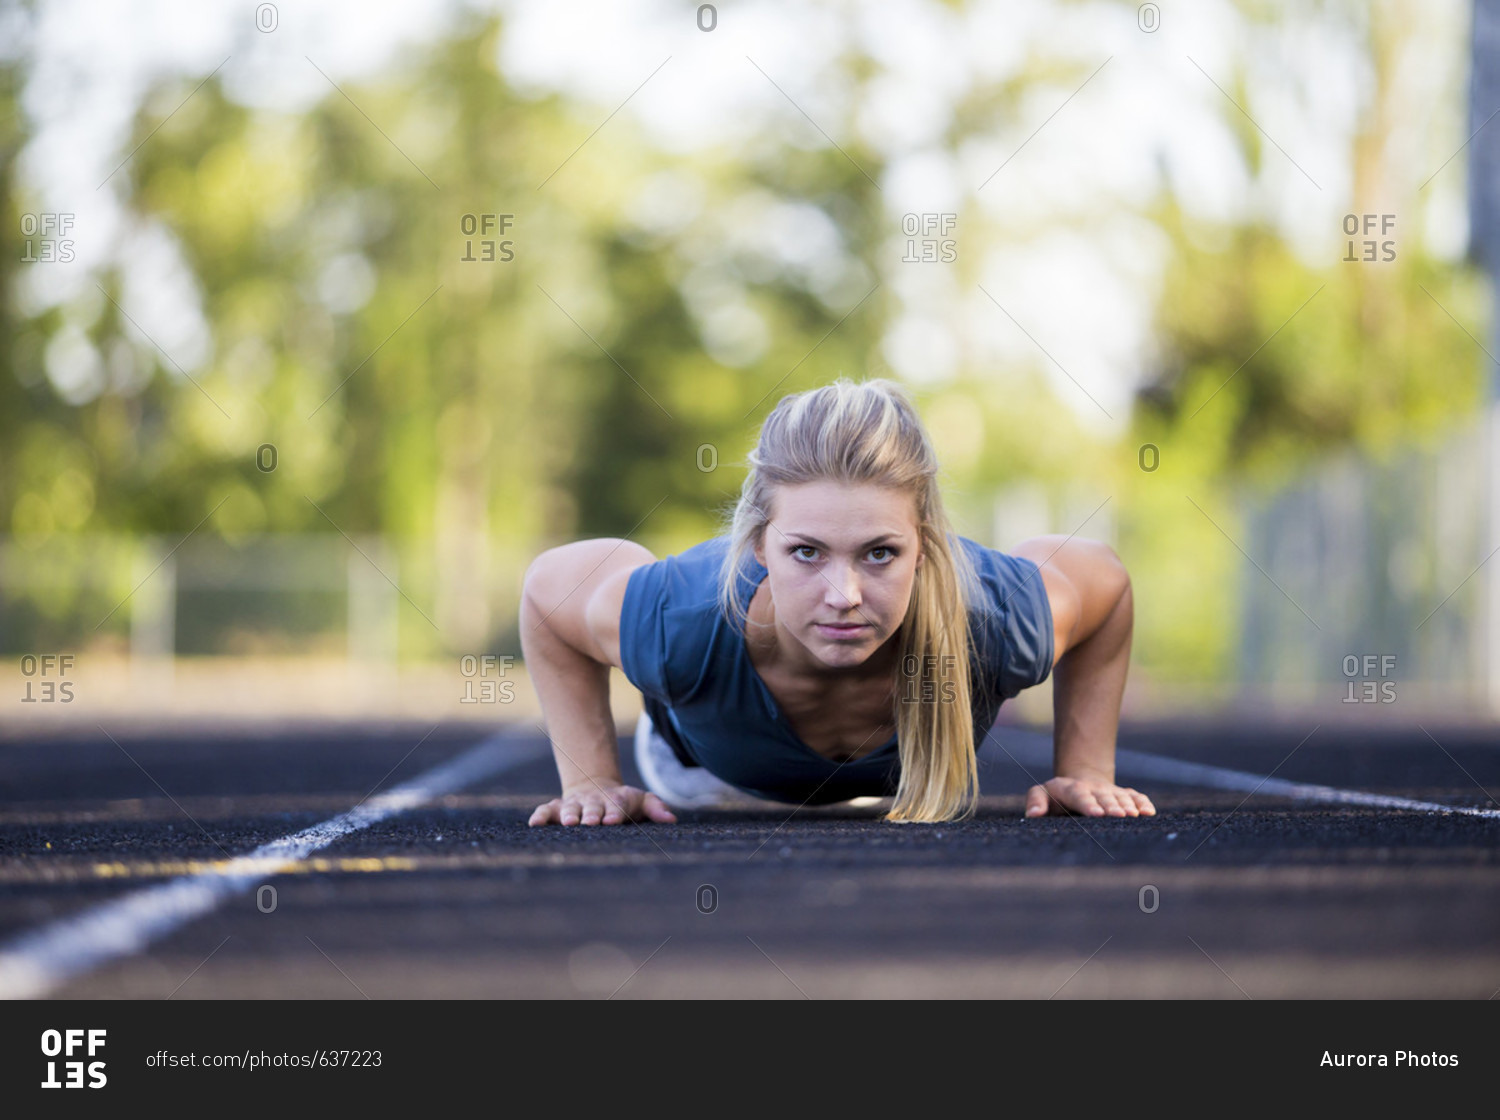 Female runner with blonde hair and ponytail exercising by doing push-ups on track, Eugene, Oregon, USA